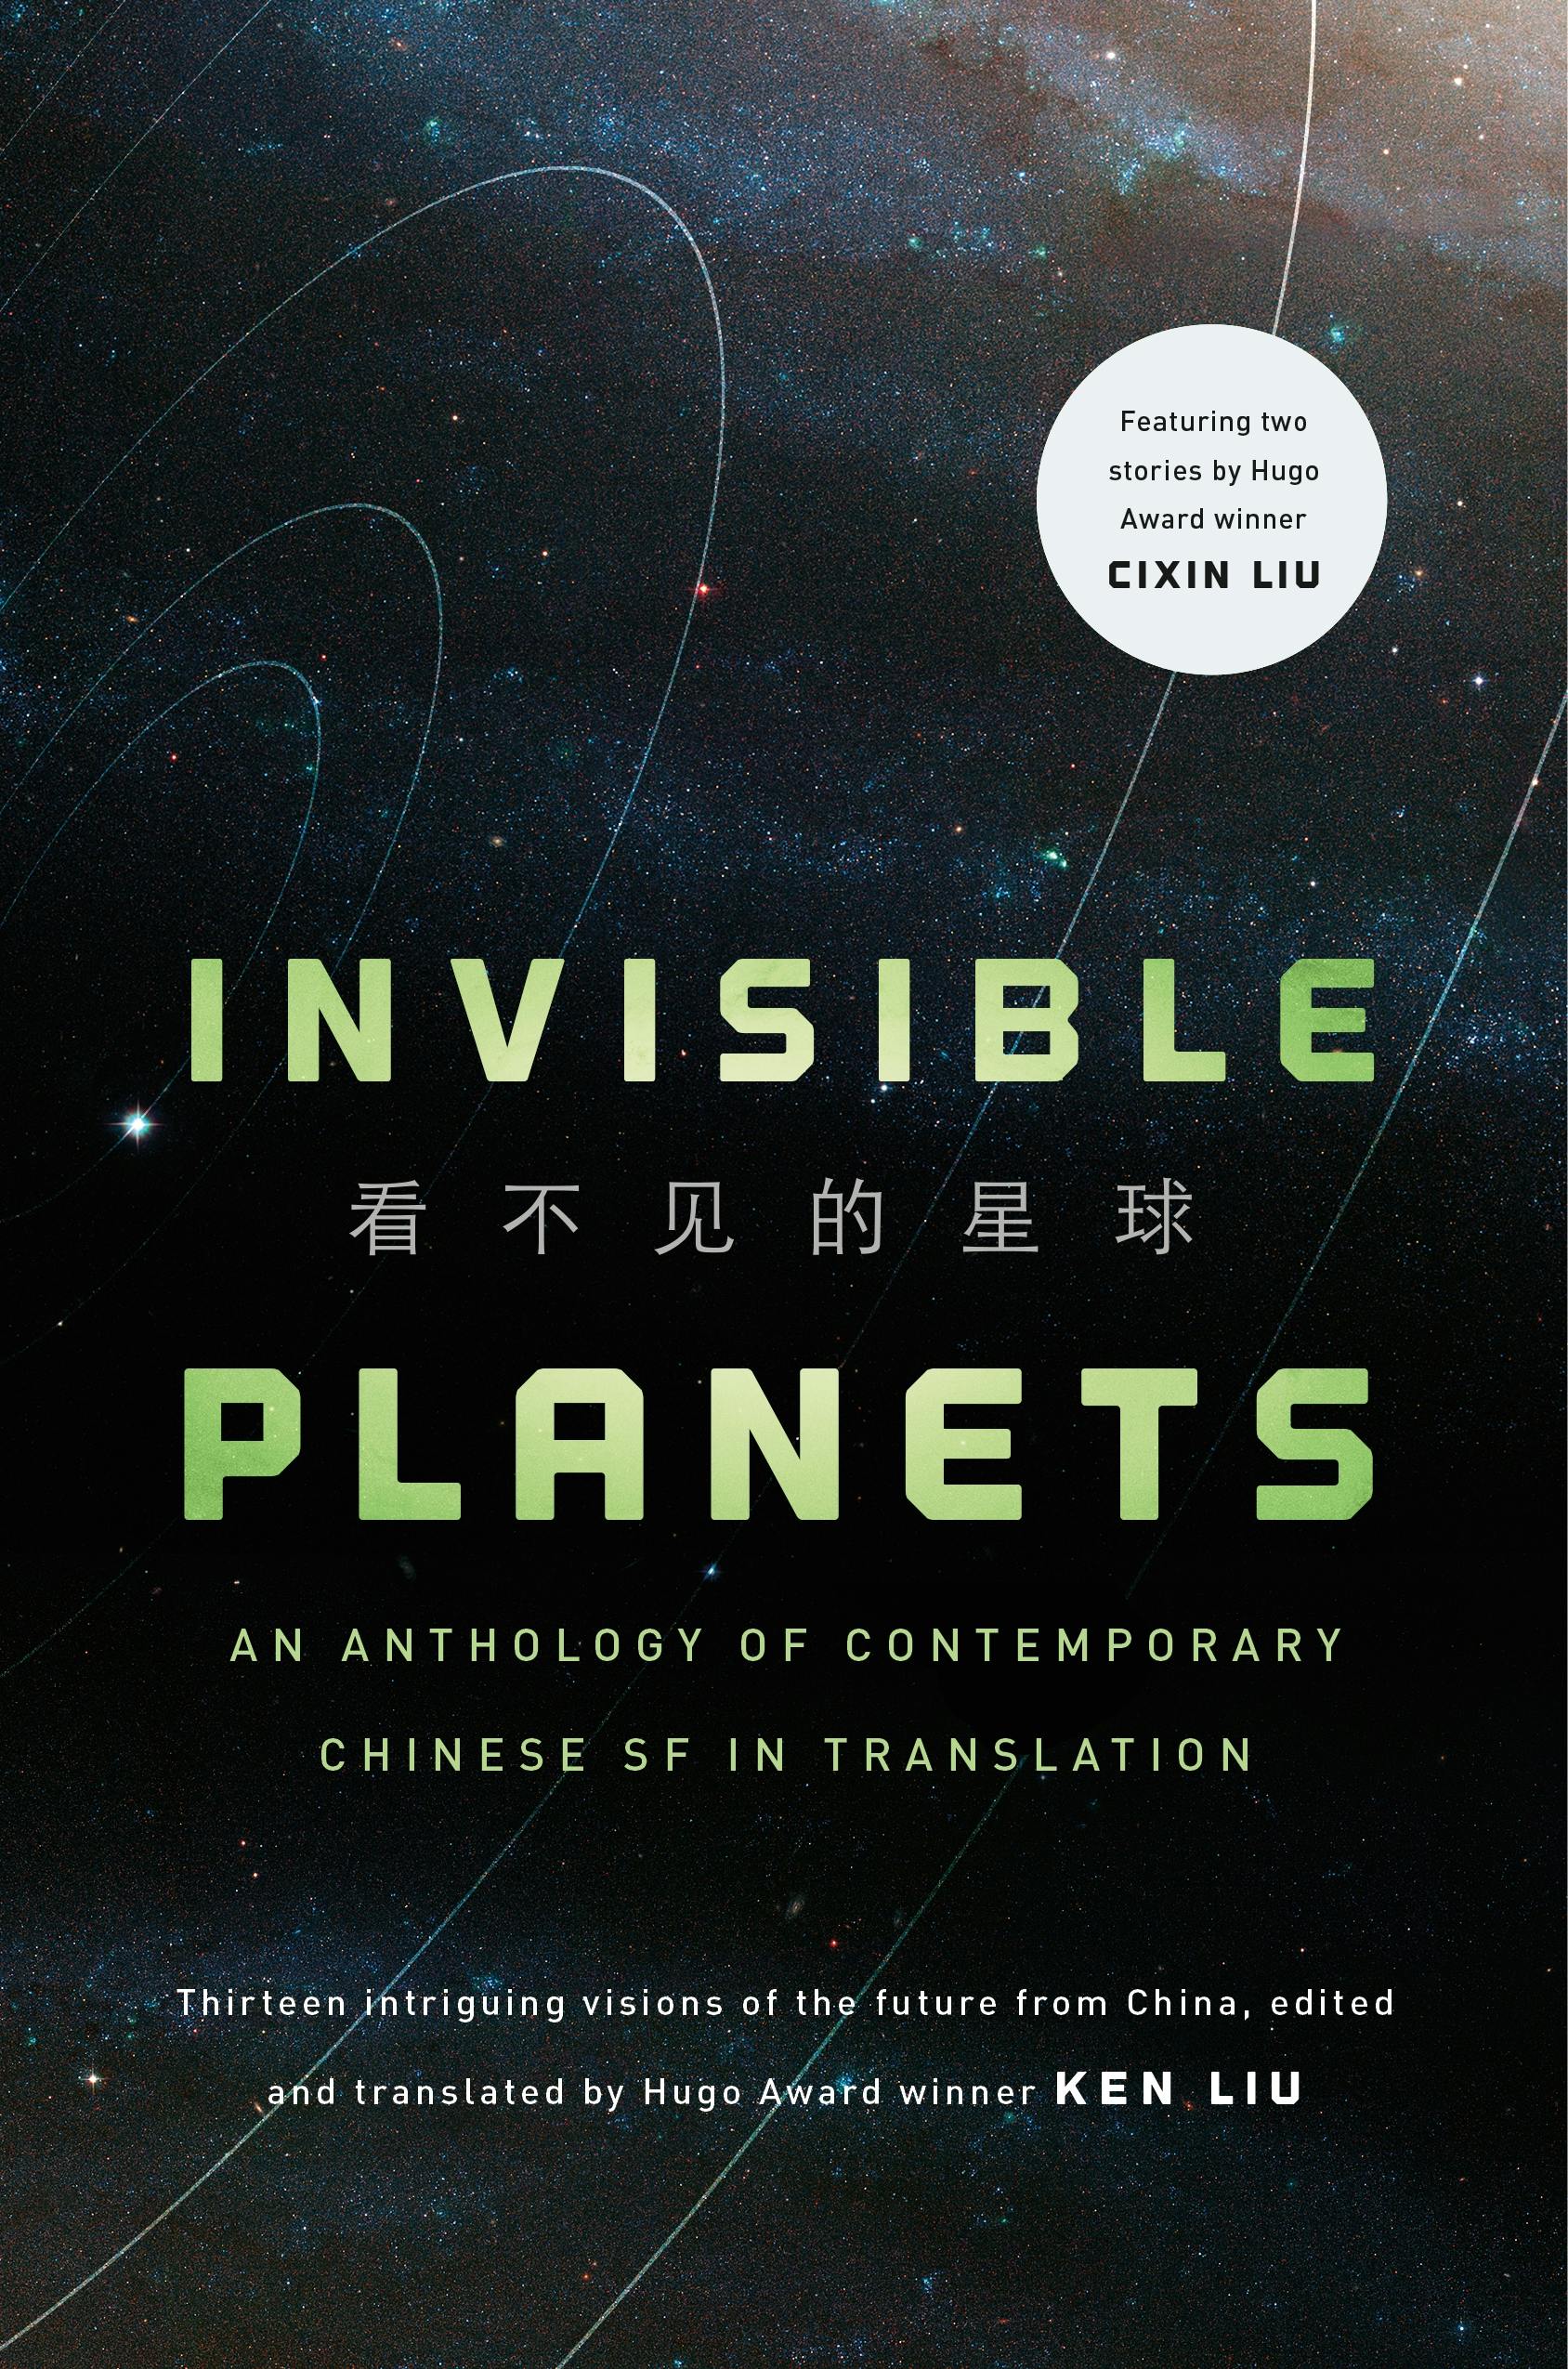 Cover for the book titled as: Invisible Planets